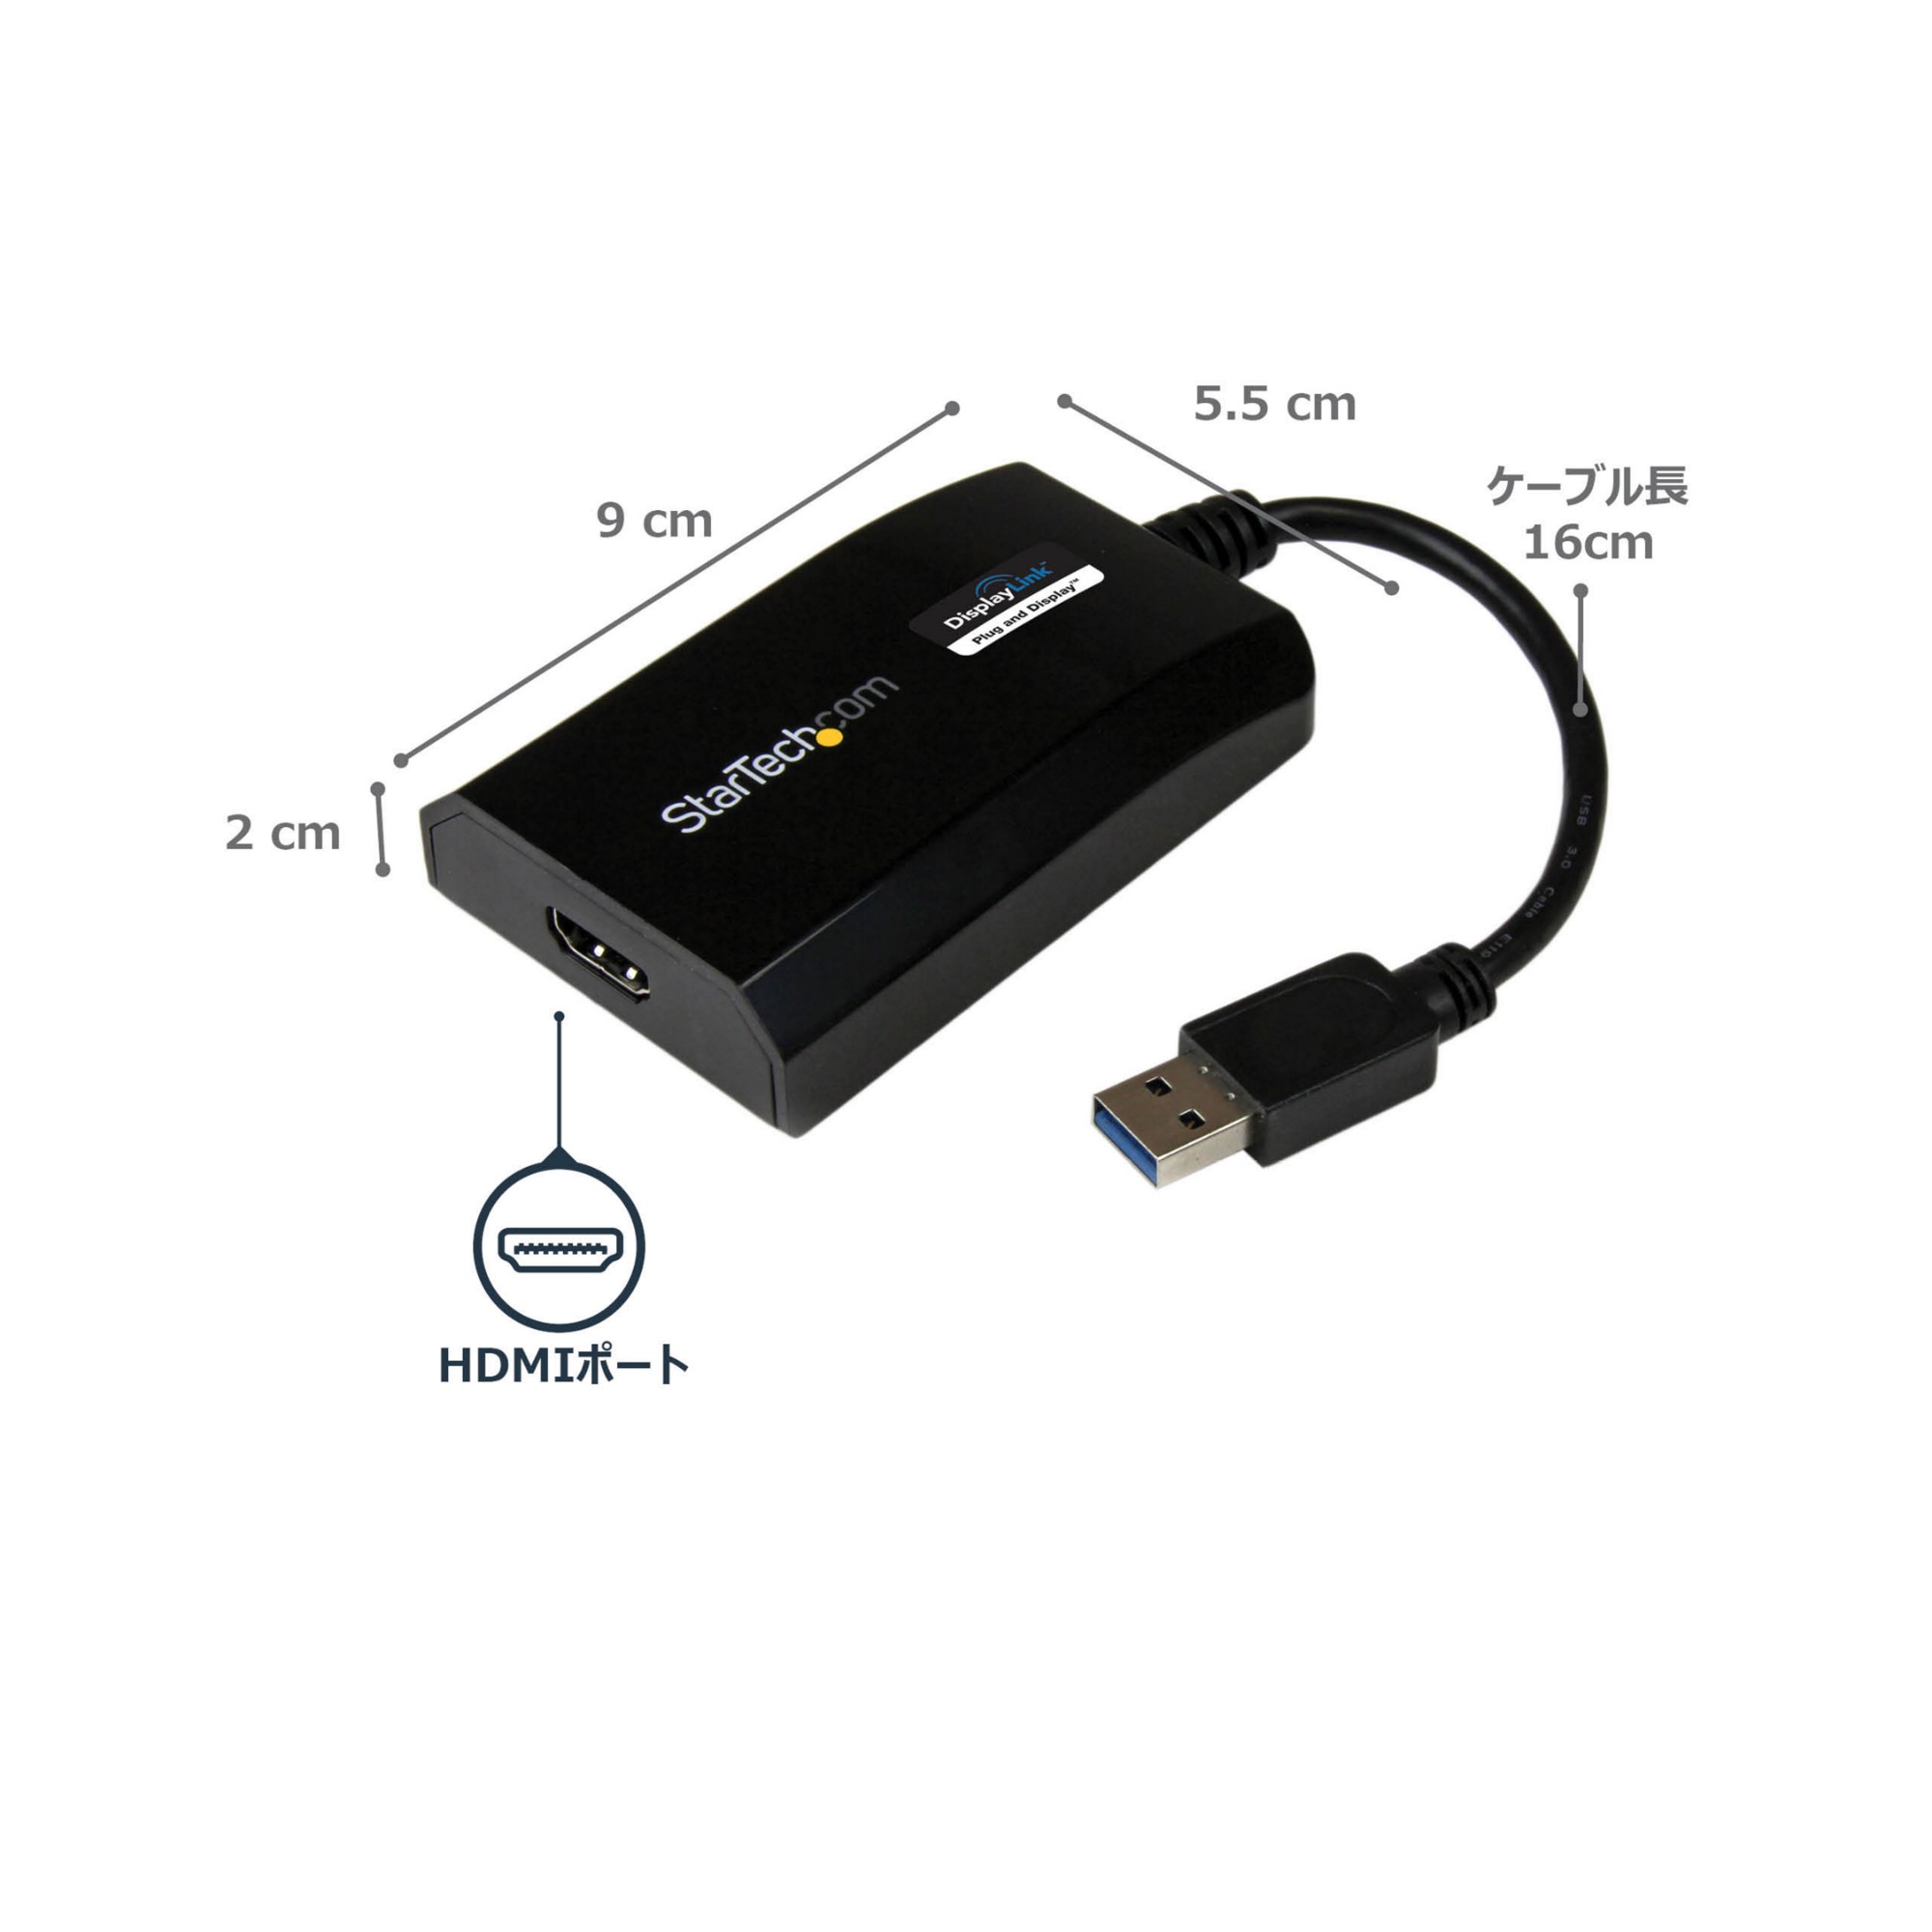 StarTech.com USB 3.0 to HDMI Adapter - DisplayLink Certified - 1080p (1920x1200) - USB Type-A to HDMI Display Adapter Converter for Monitor - External Video & Graphics Card - Windows/Mac